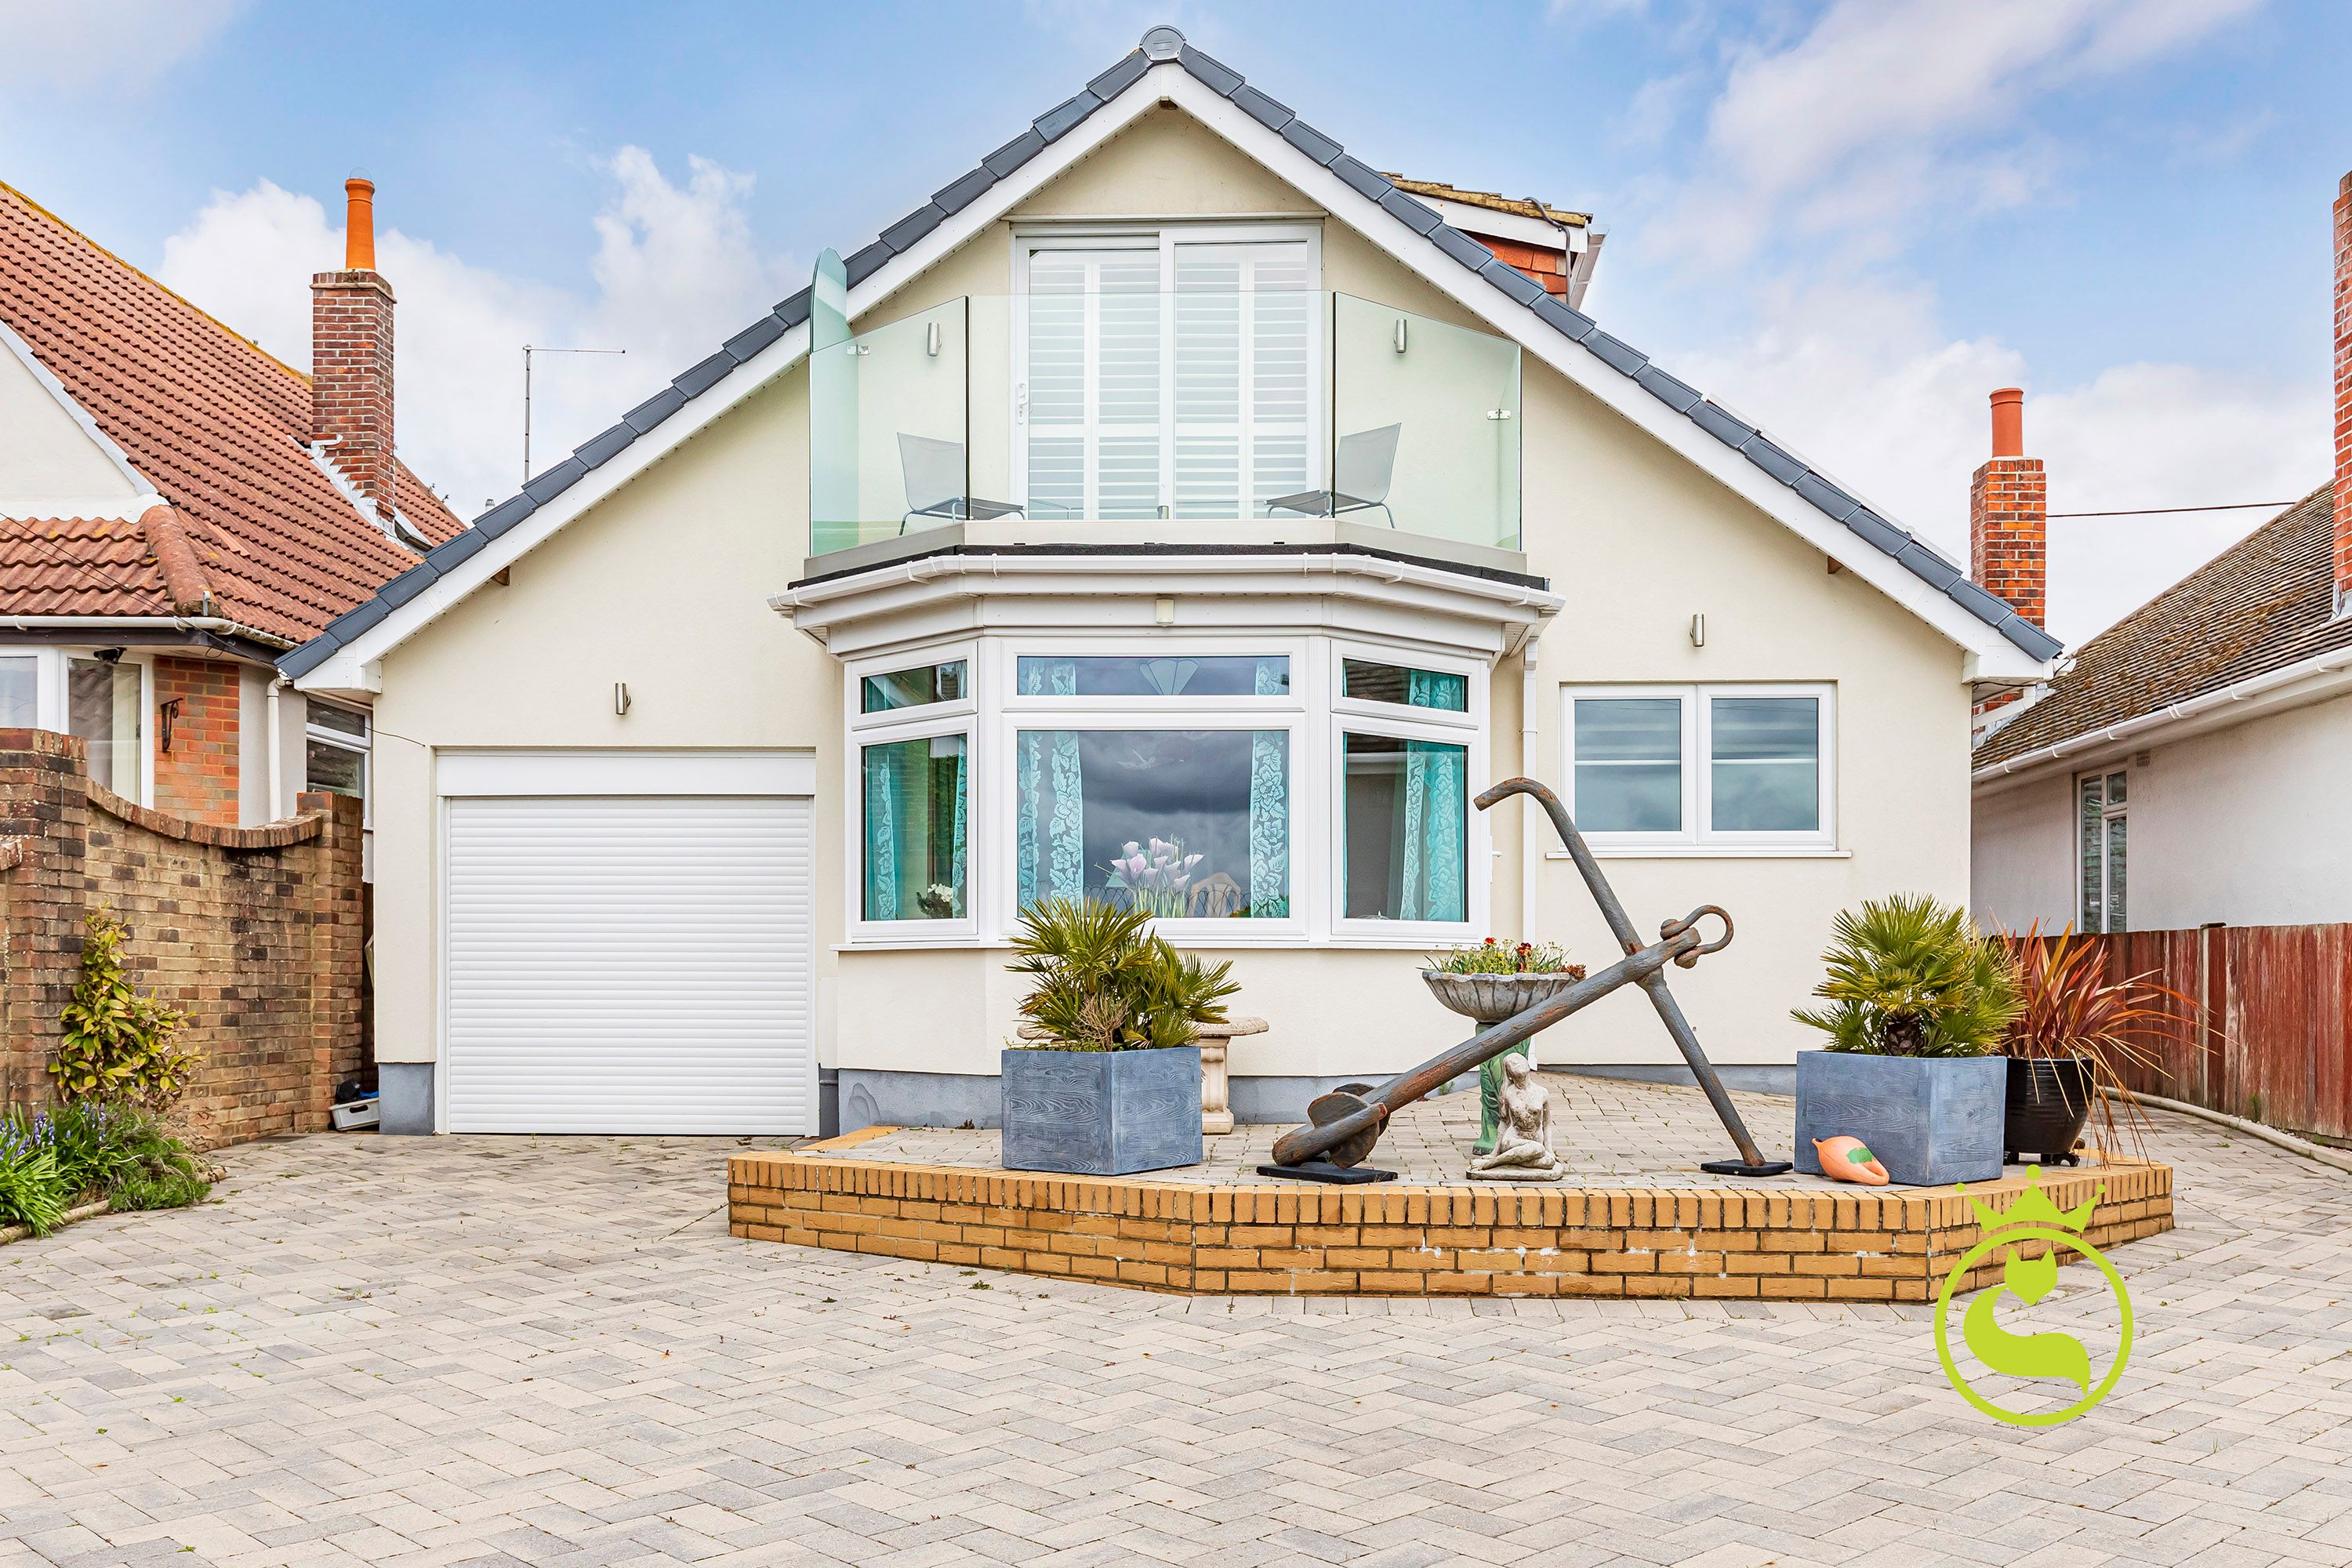 LOCATION, LOCATION, LOCATION! Don't miss out on this great opportunity to buy a fabulous home! Prestigious location and substantial home offering sea views and potential to create an annexe.